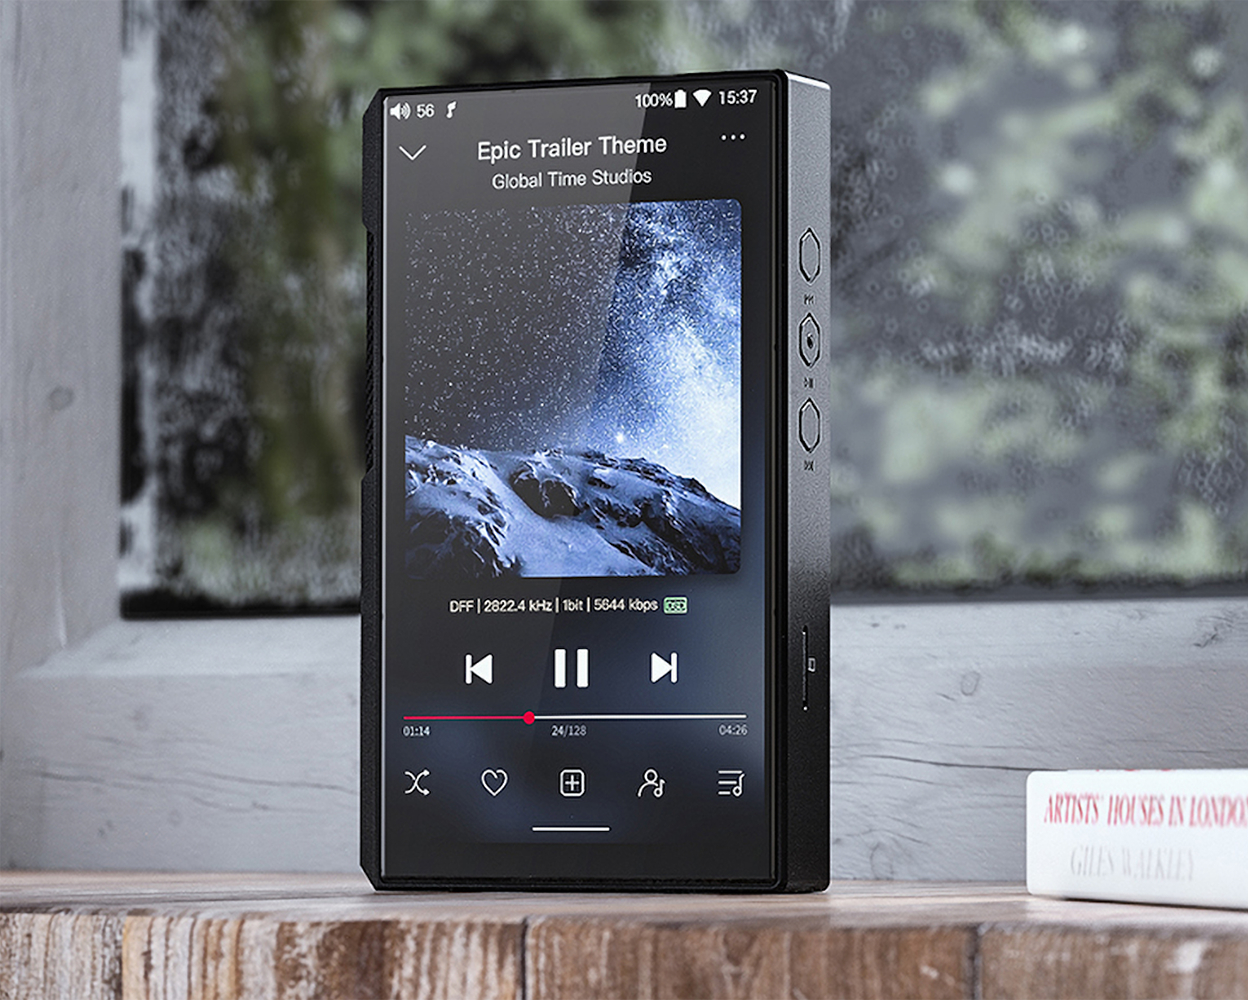 FiiO's M11S is more than just a portable audio player